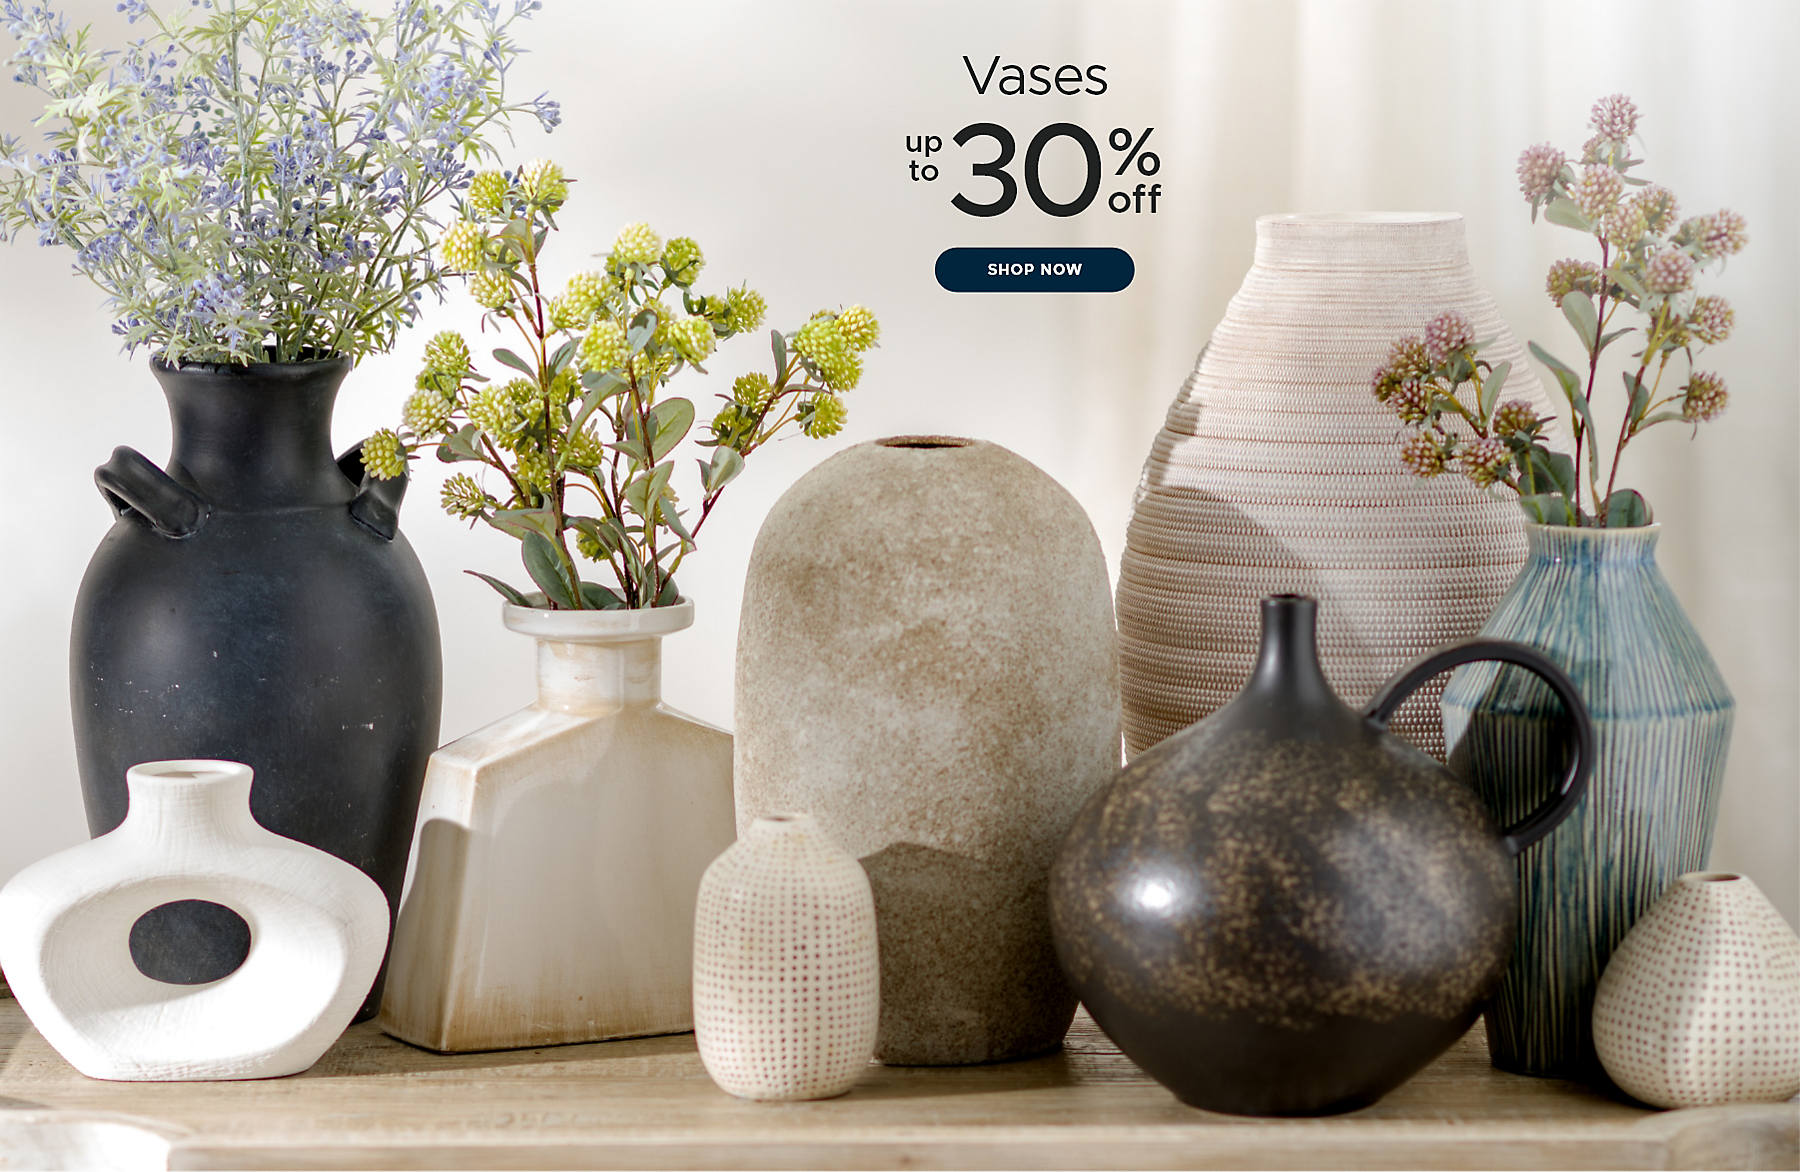 Vases up to 30% off shop now